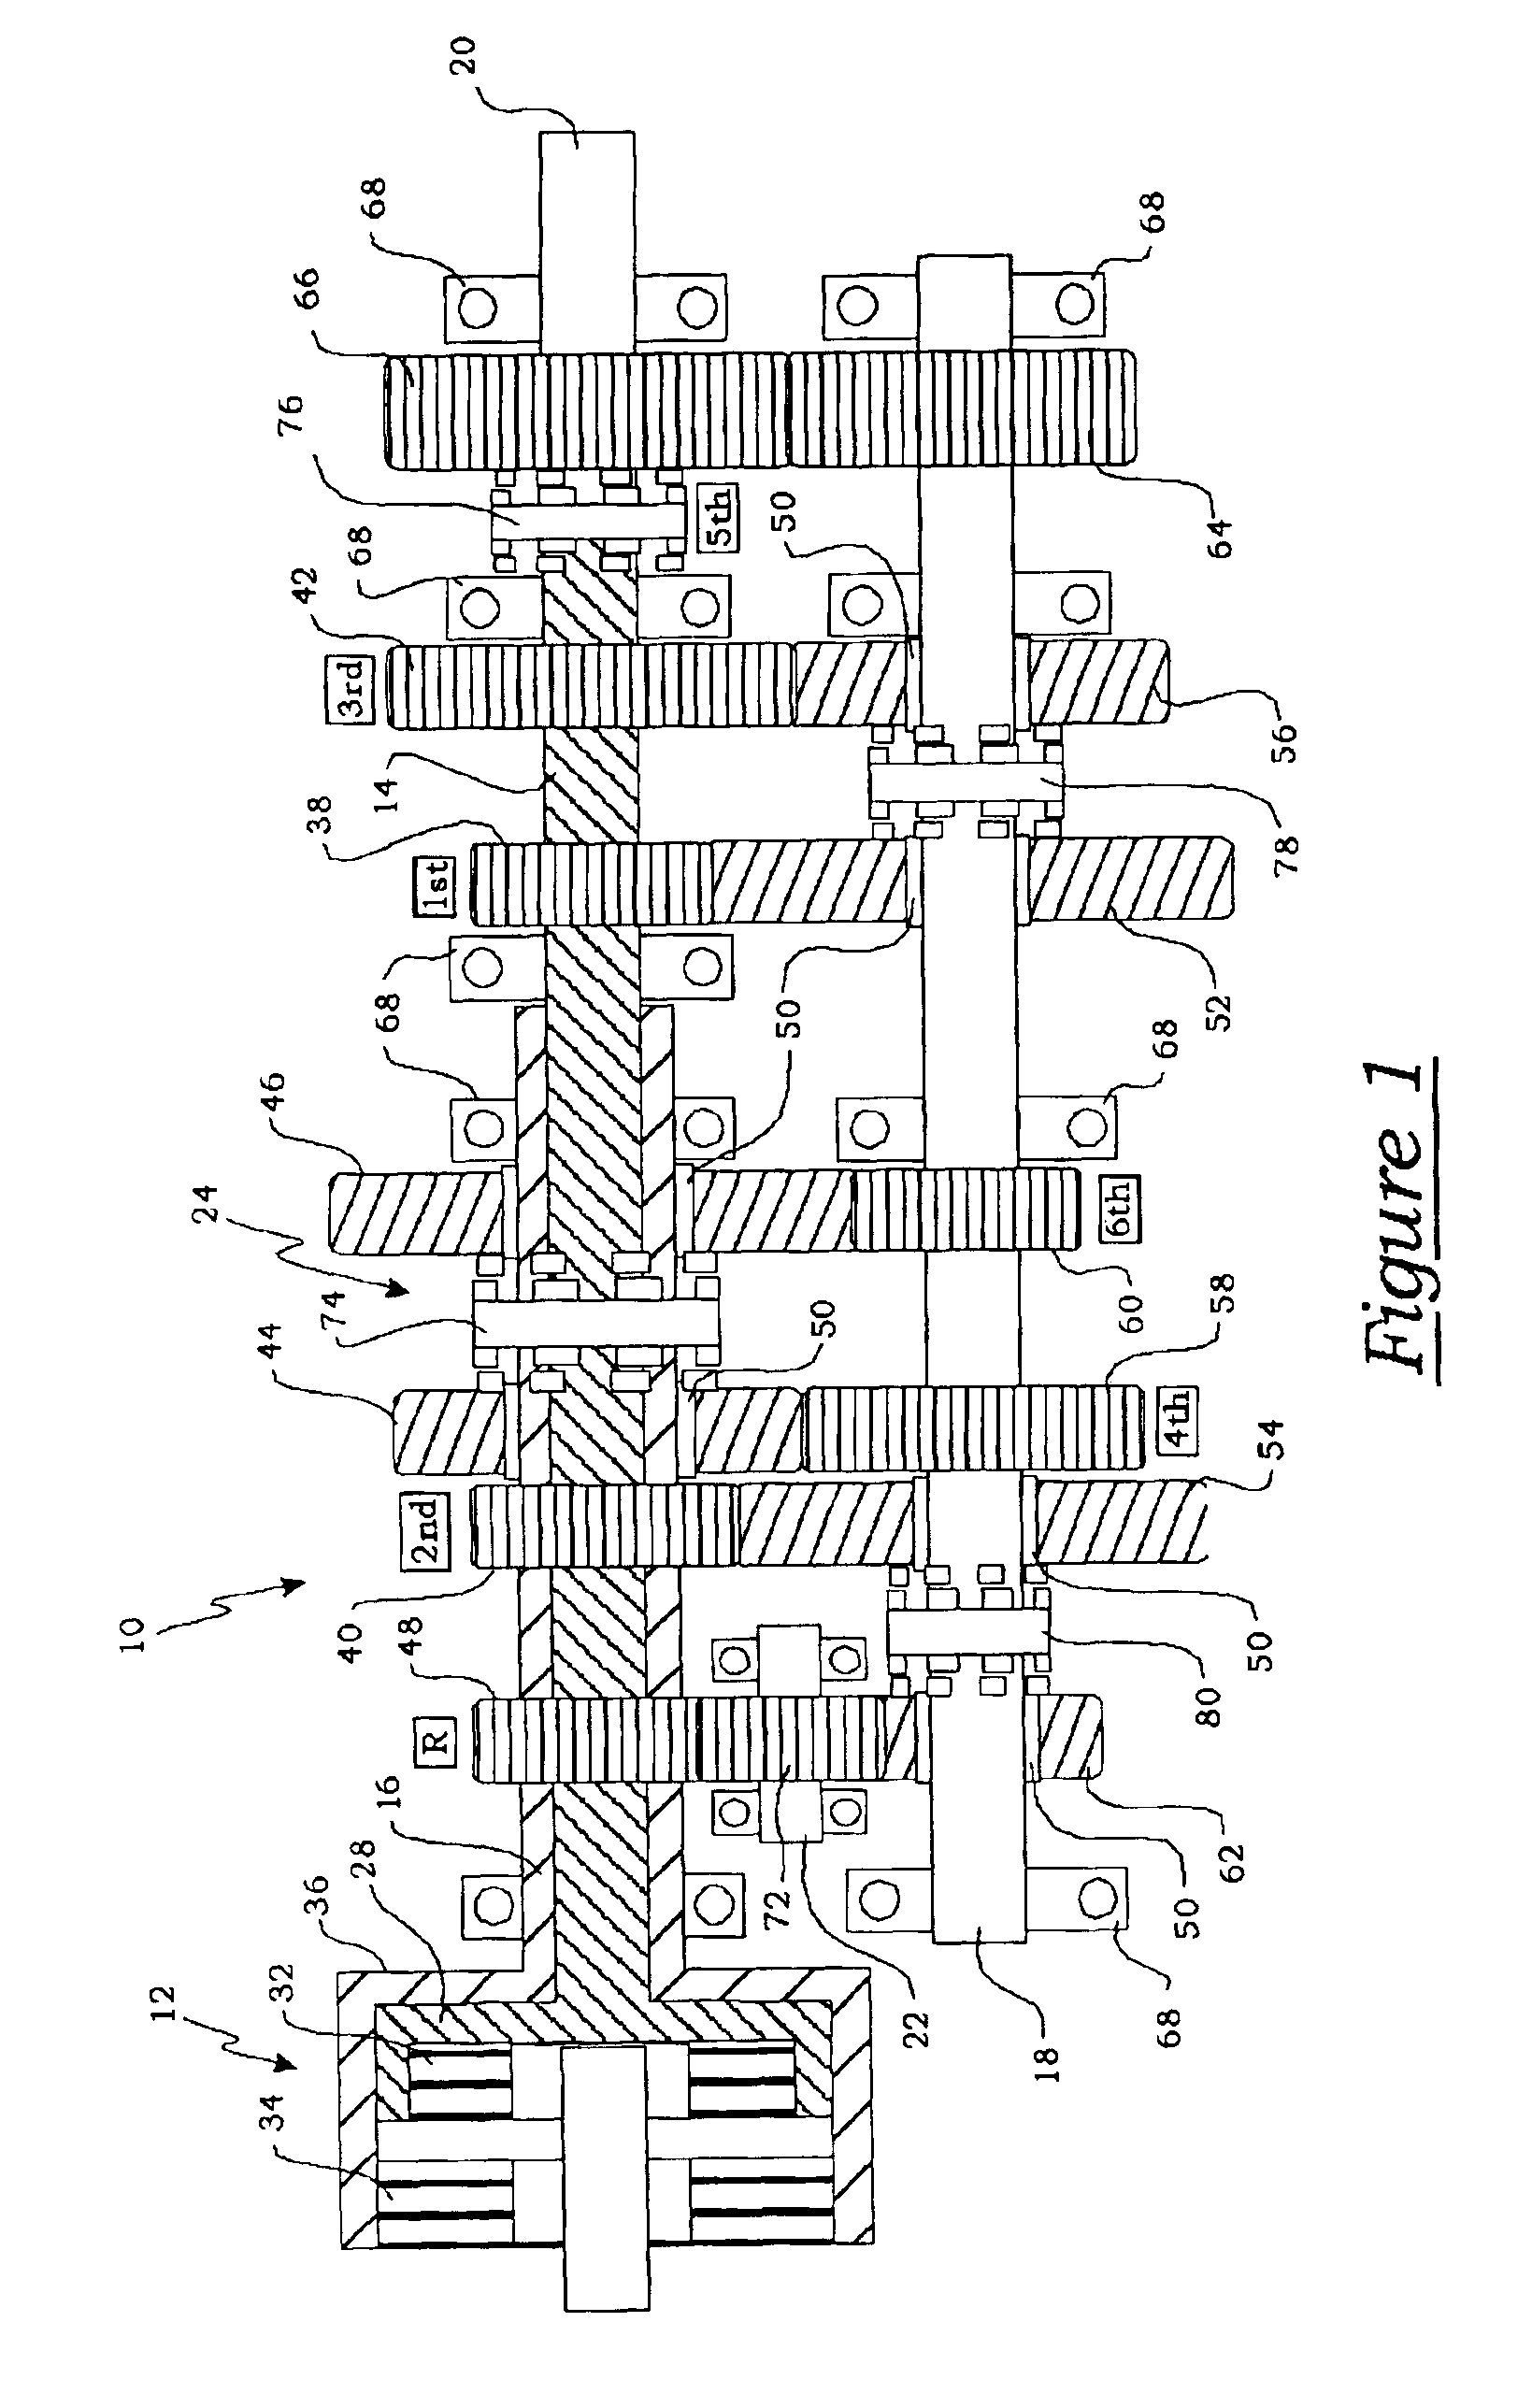 Method of controlling a dual clutch transmission